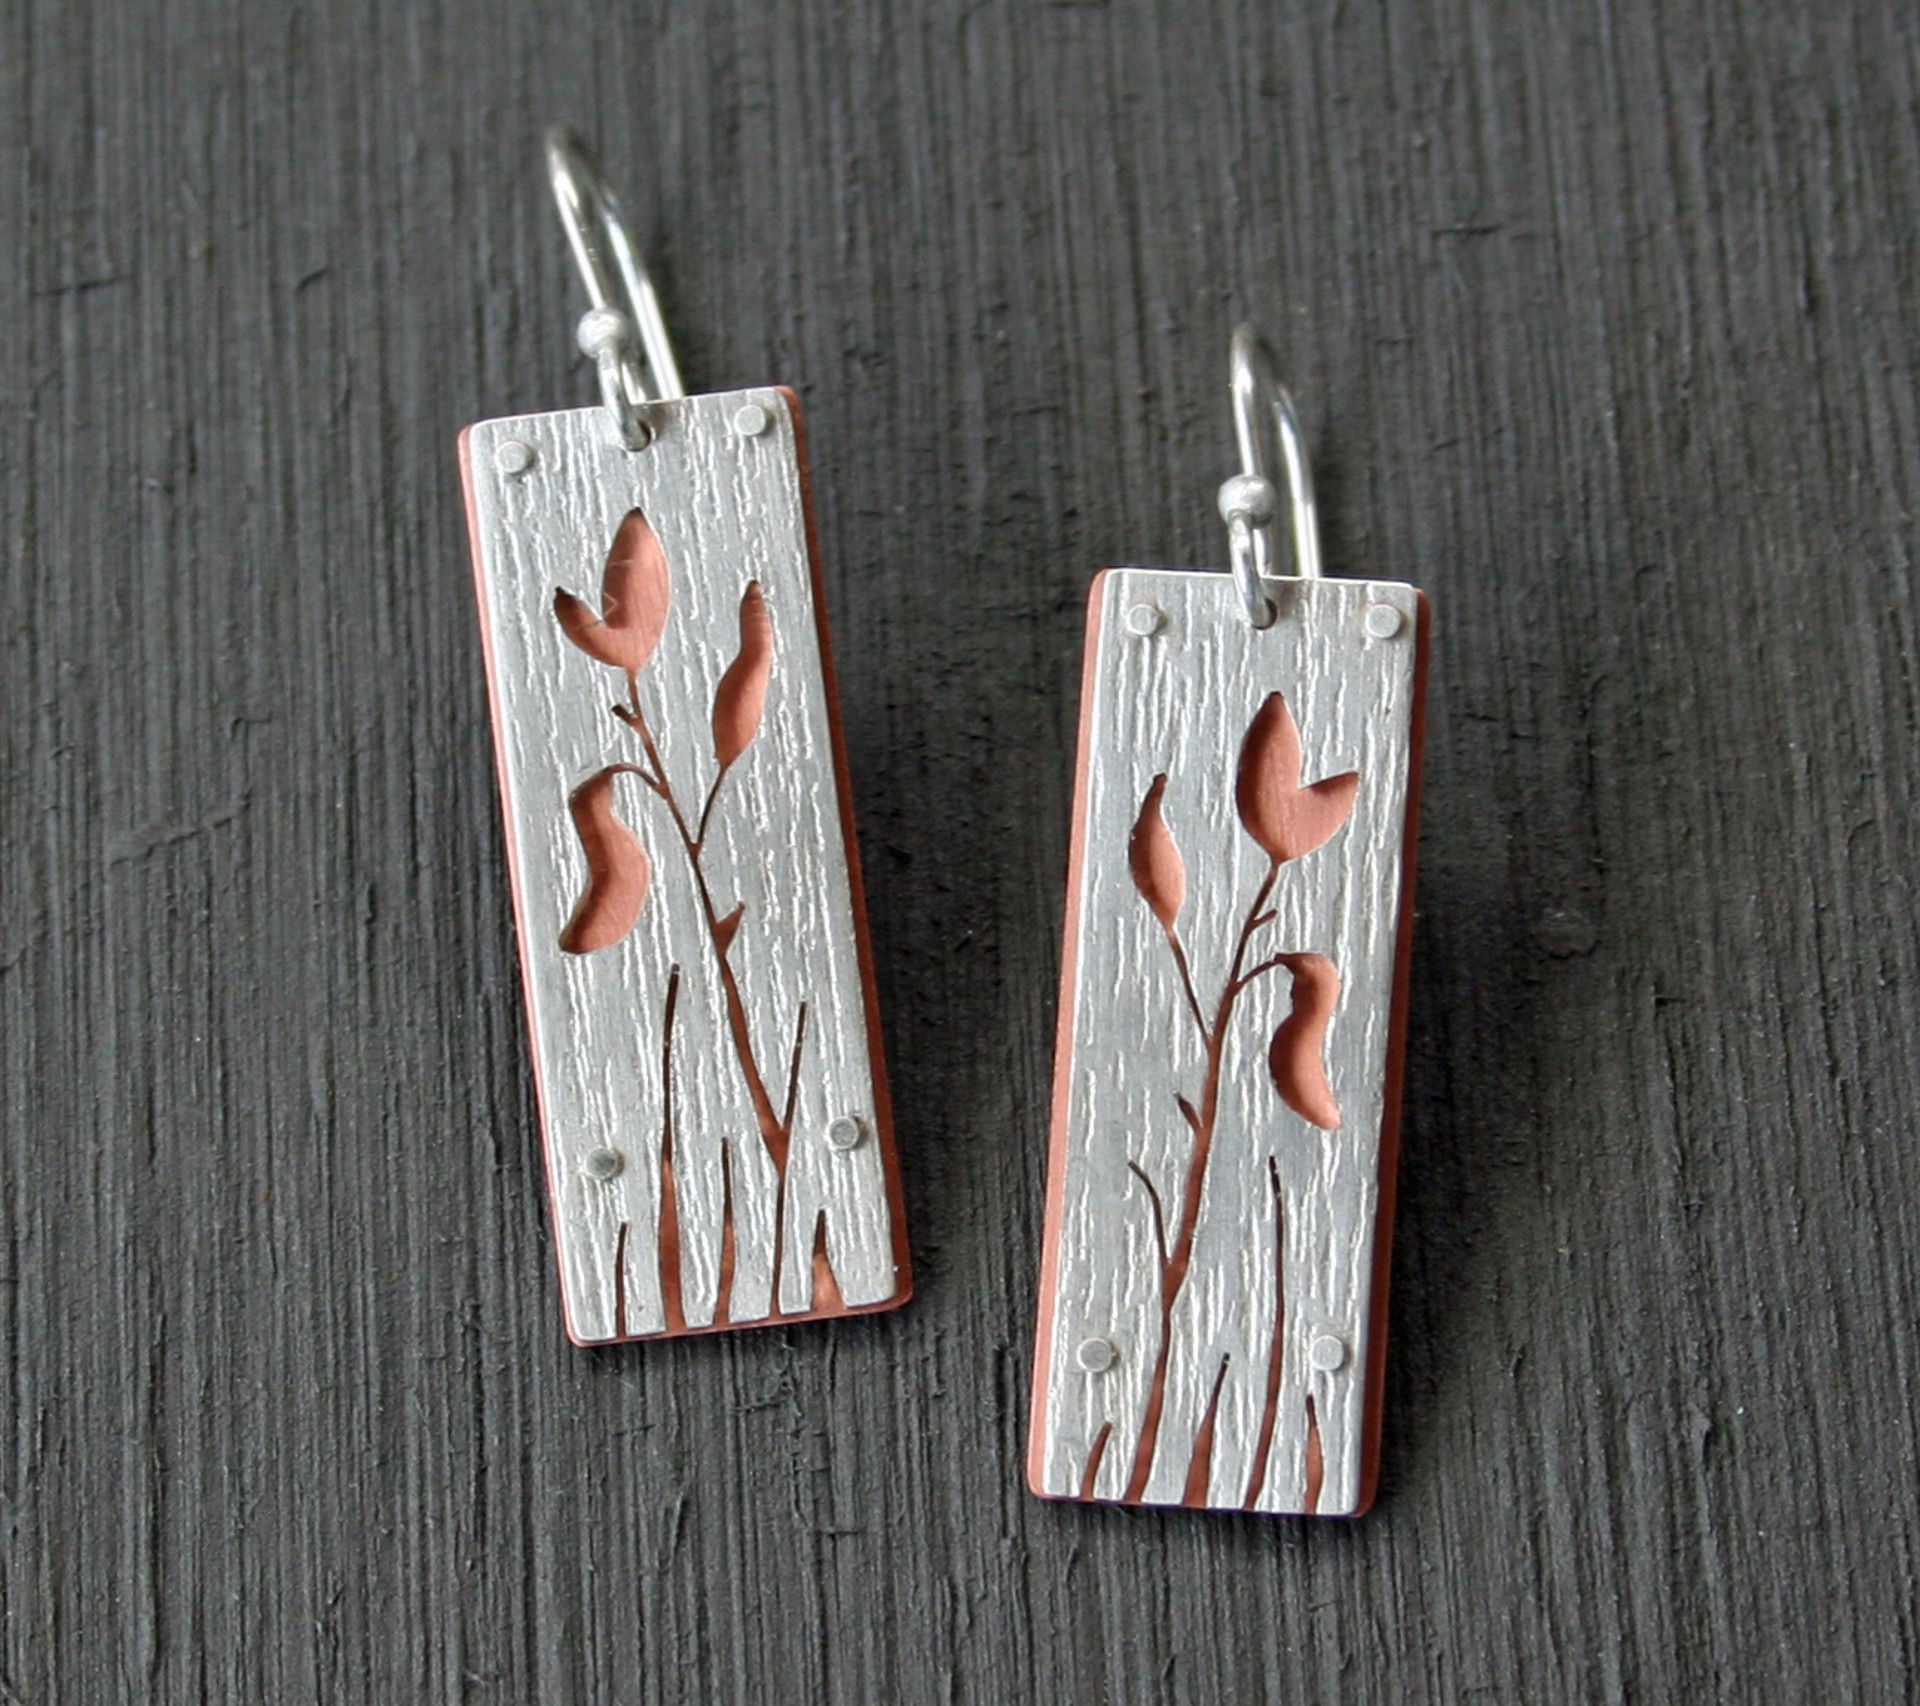 Spring Flora Earrings - SOLD by Christie Calaycay